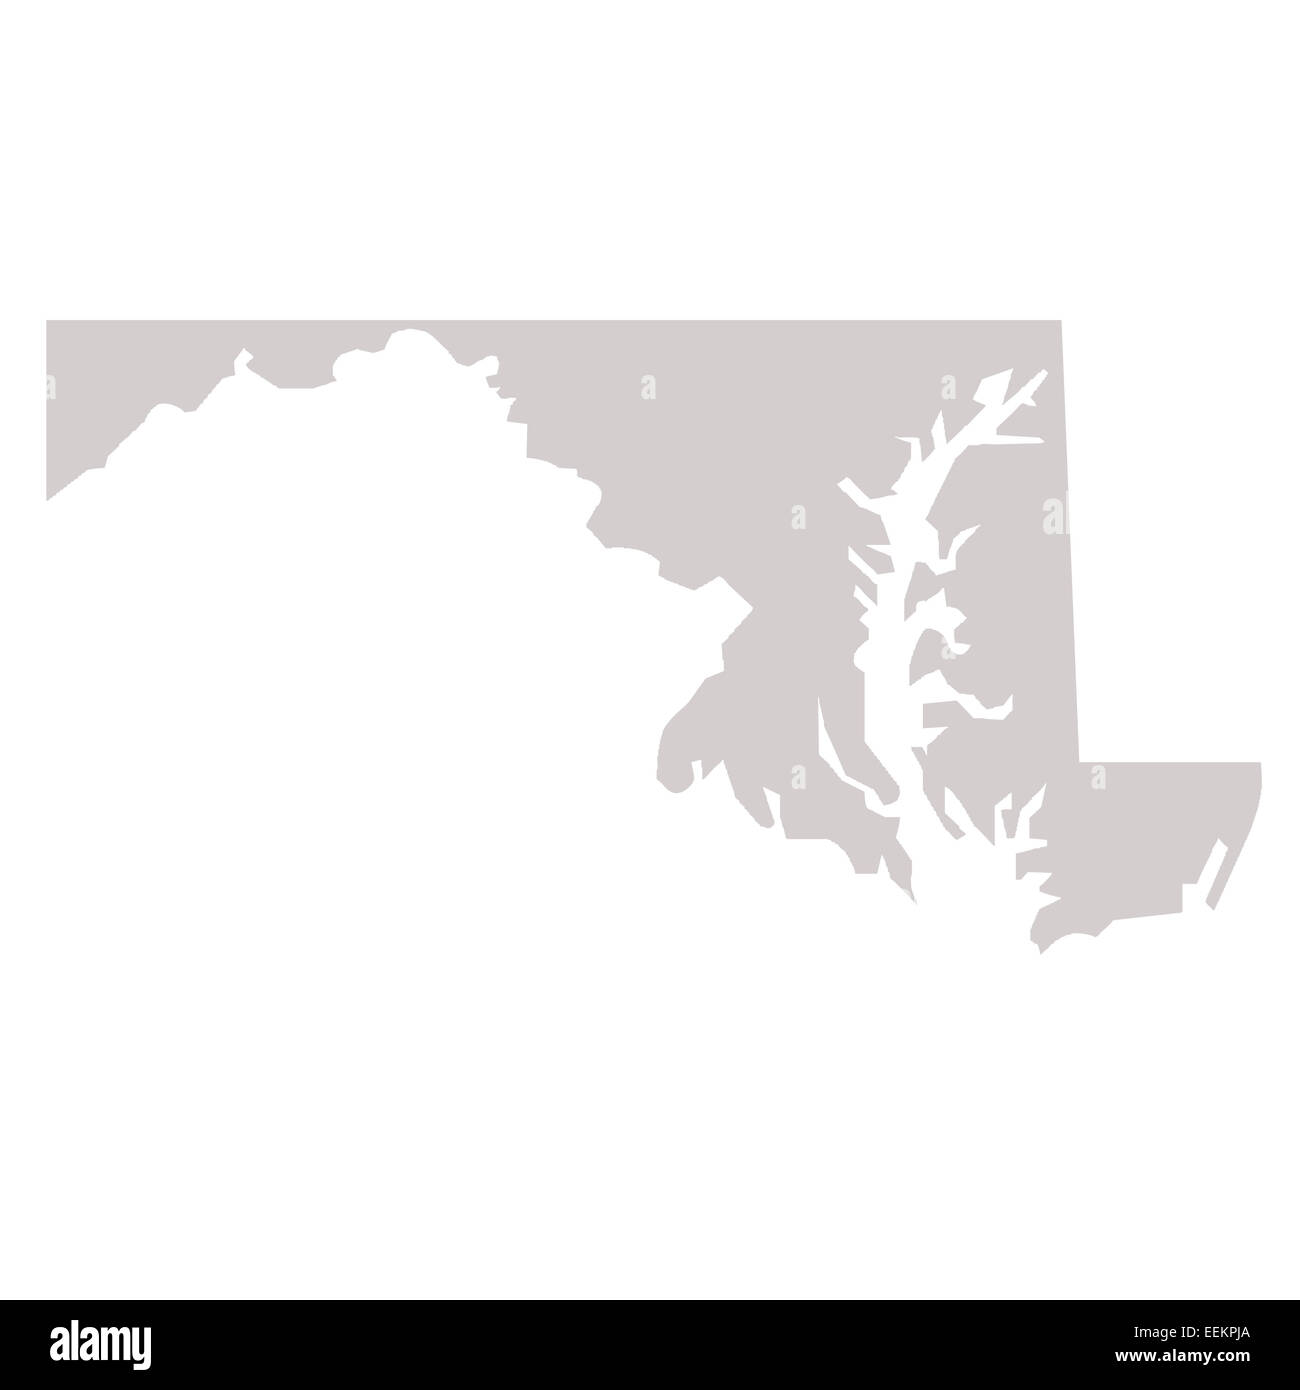 Maryland State map isolated on a white background, USA. Stock Photo